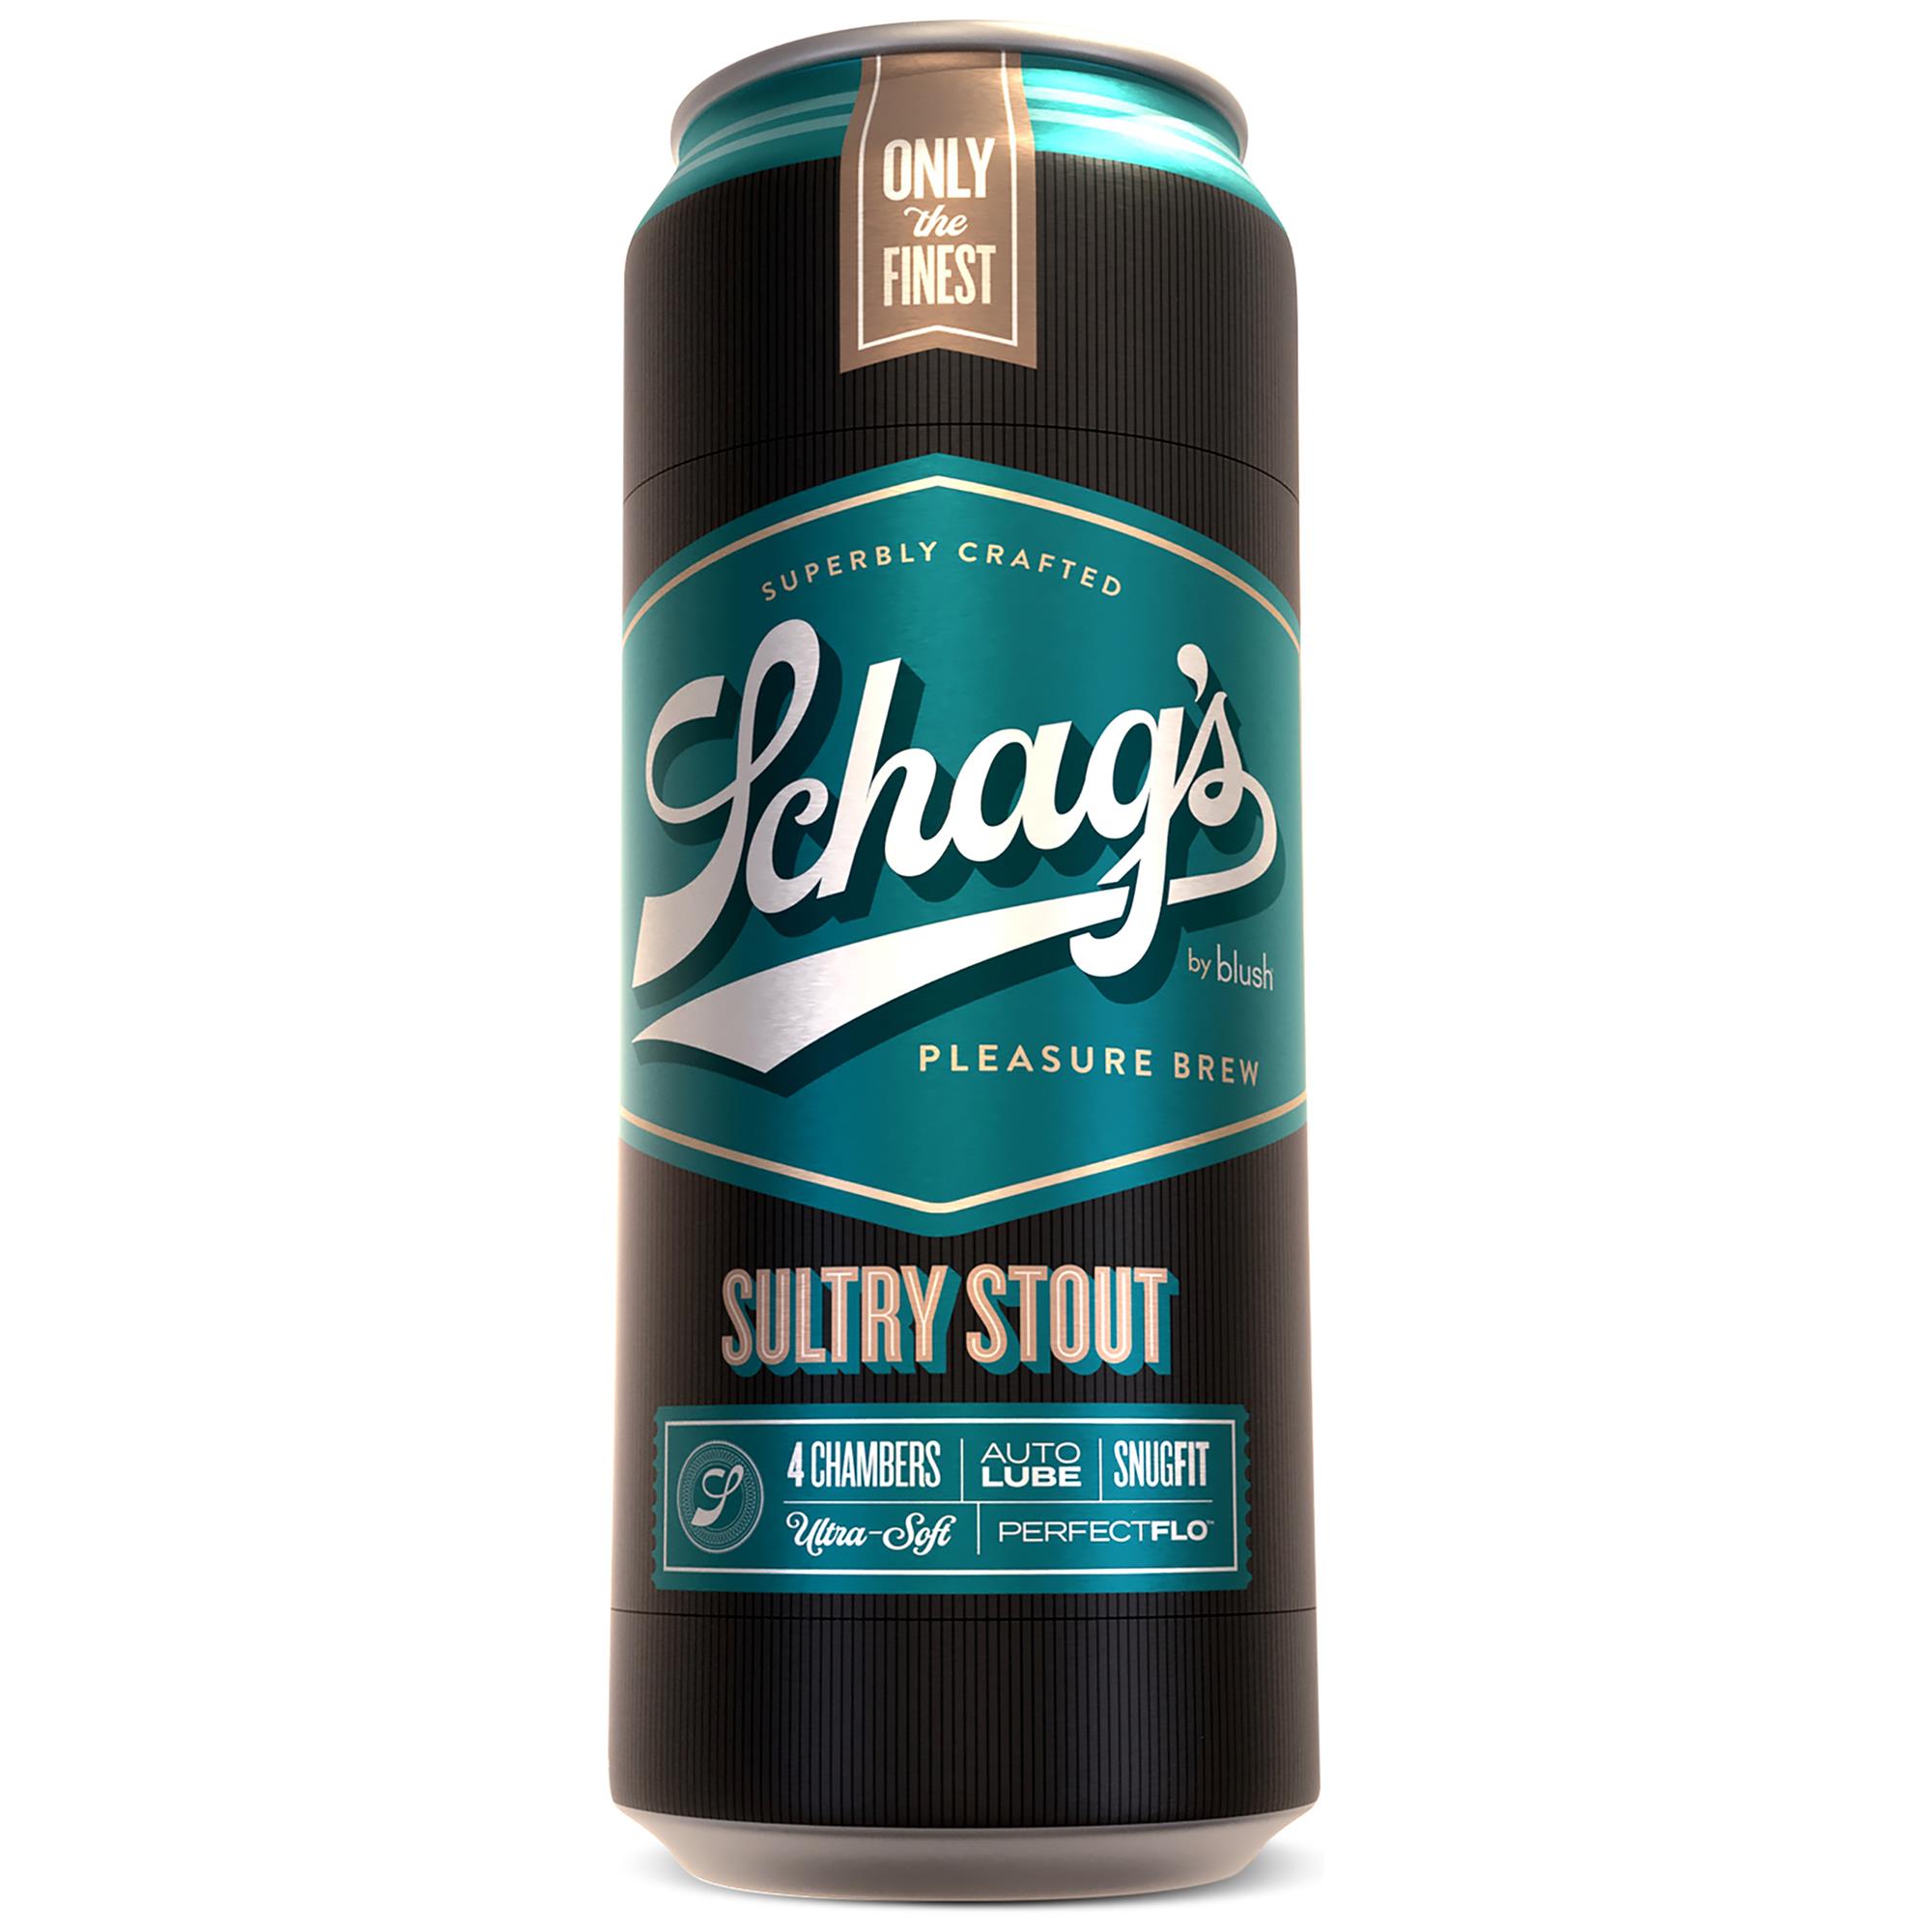 Schags Sultry Stout Frosted thumbnail